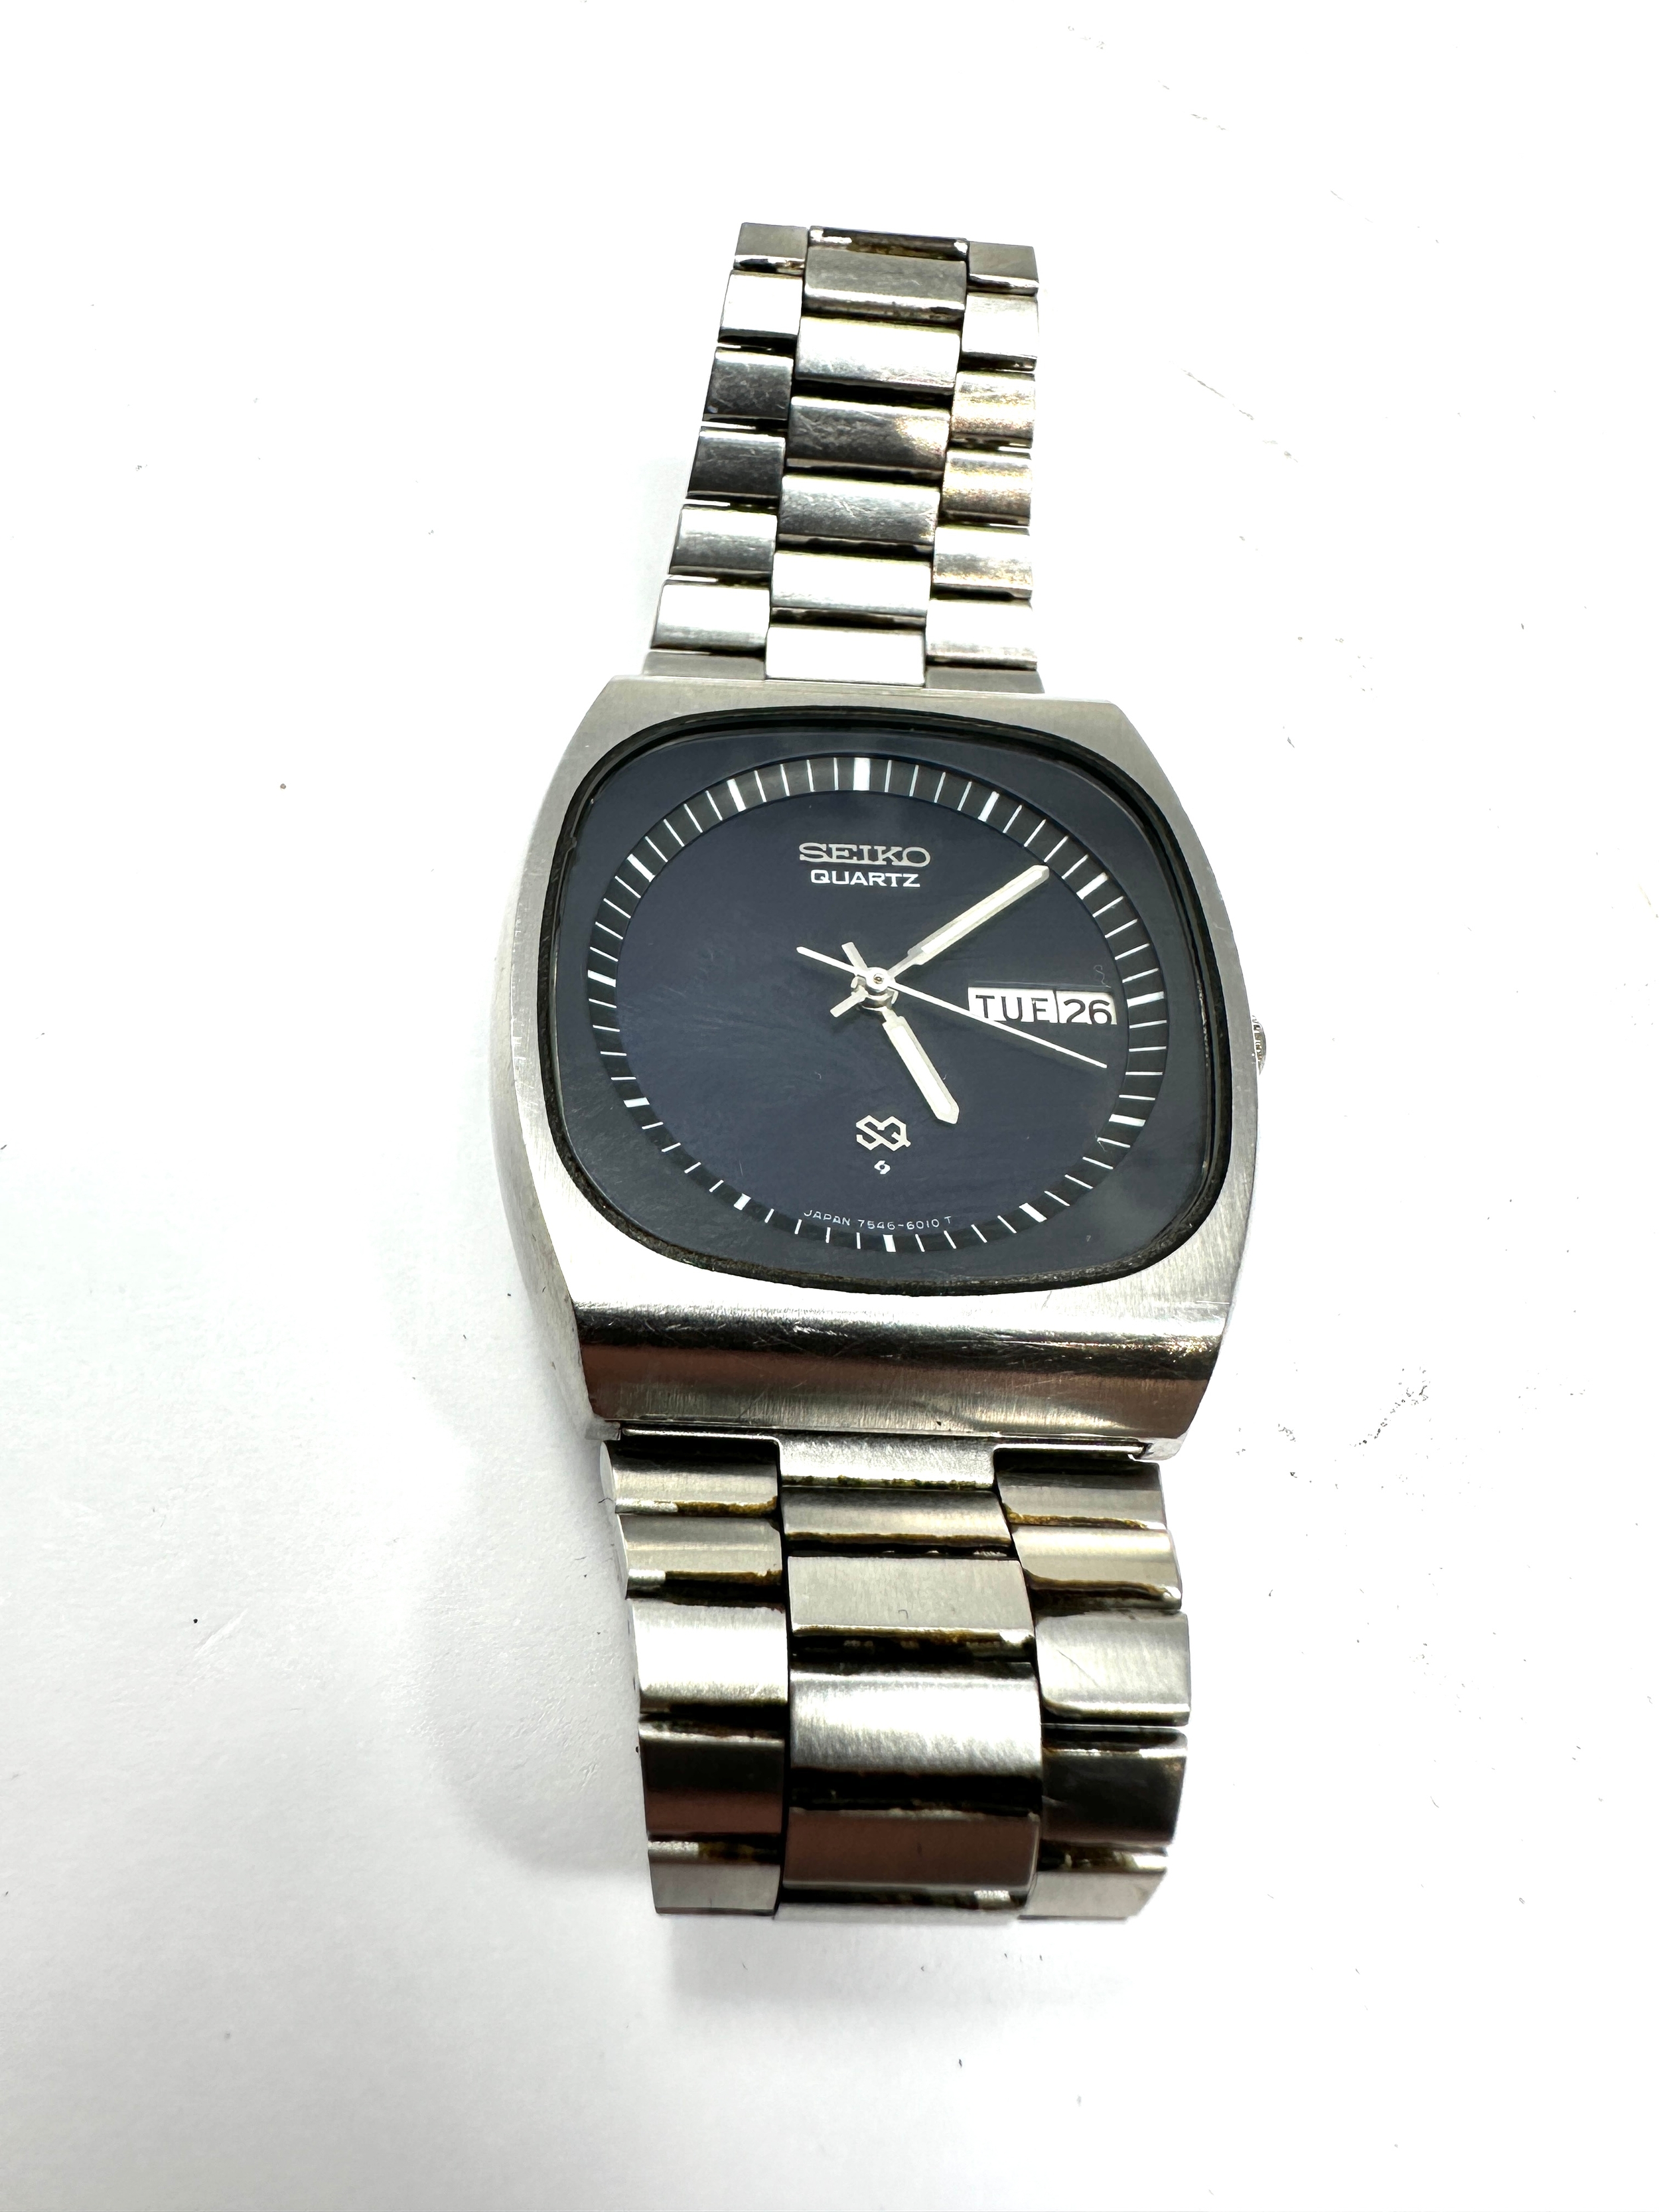 Gents quartz Seiko day date sq 7546-6010 the watch was ticking but has stopped possibly needs